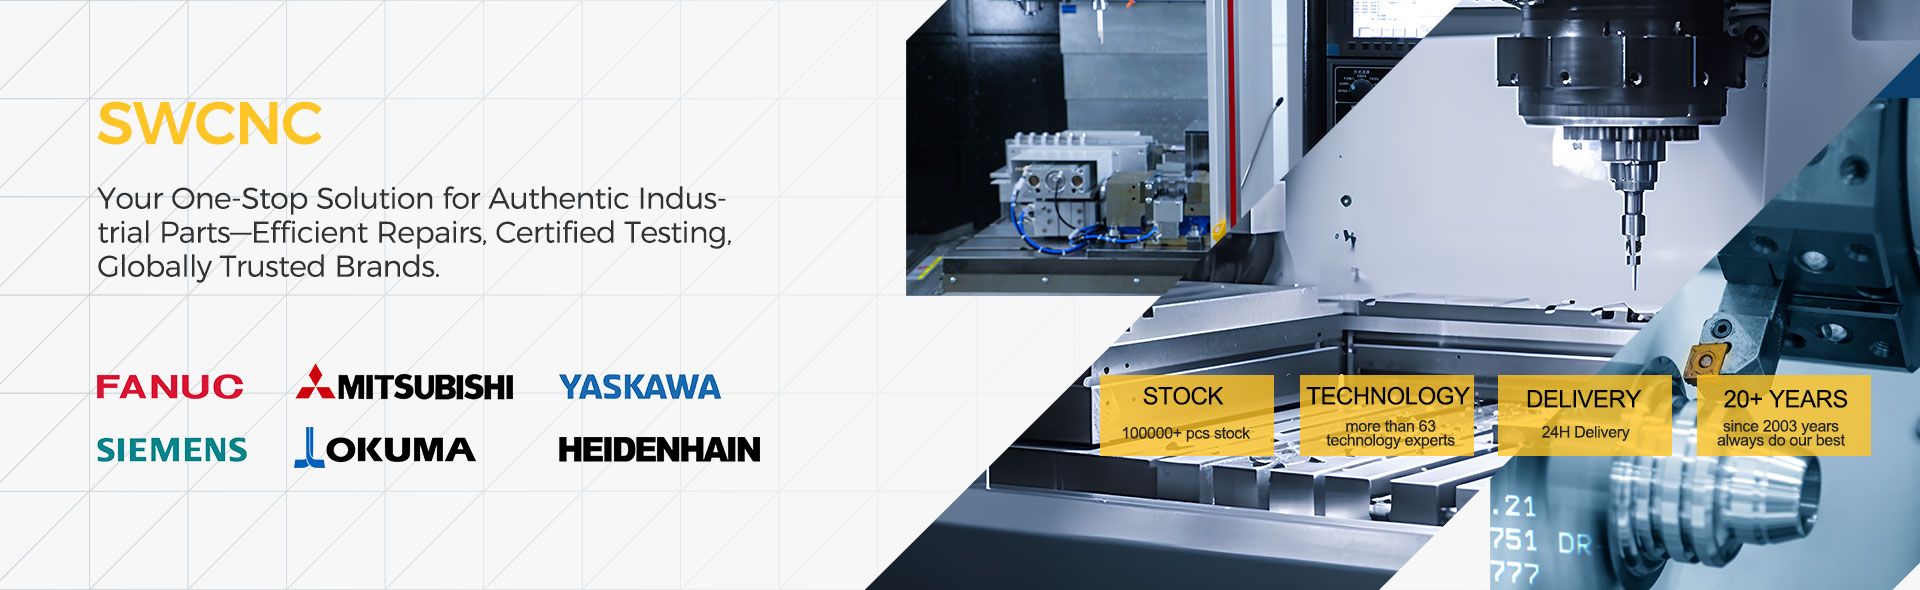 SWCNC mainly sales Fanuc | Siemens | mitsubishi ｜Yaskawa and other CNC brands, We are One-Stop CNC Solution Supplier,have very advanced test bench and technology to ensure better service to our customers